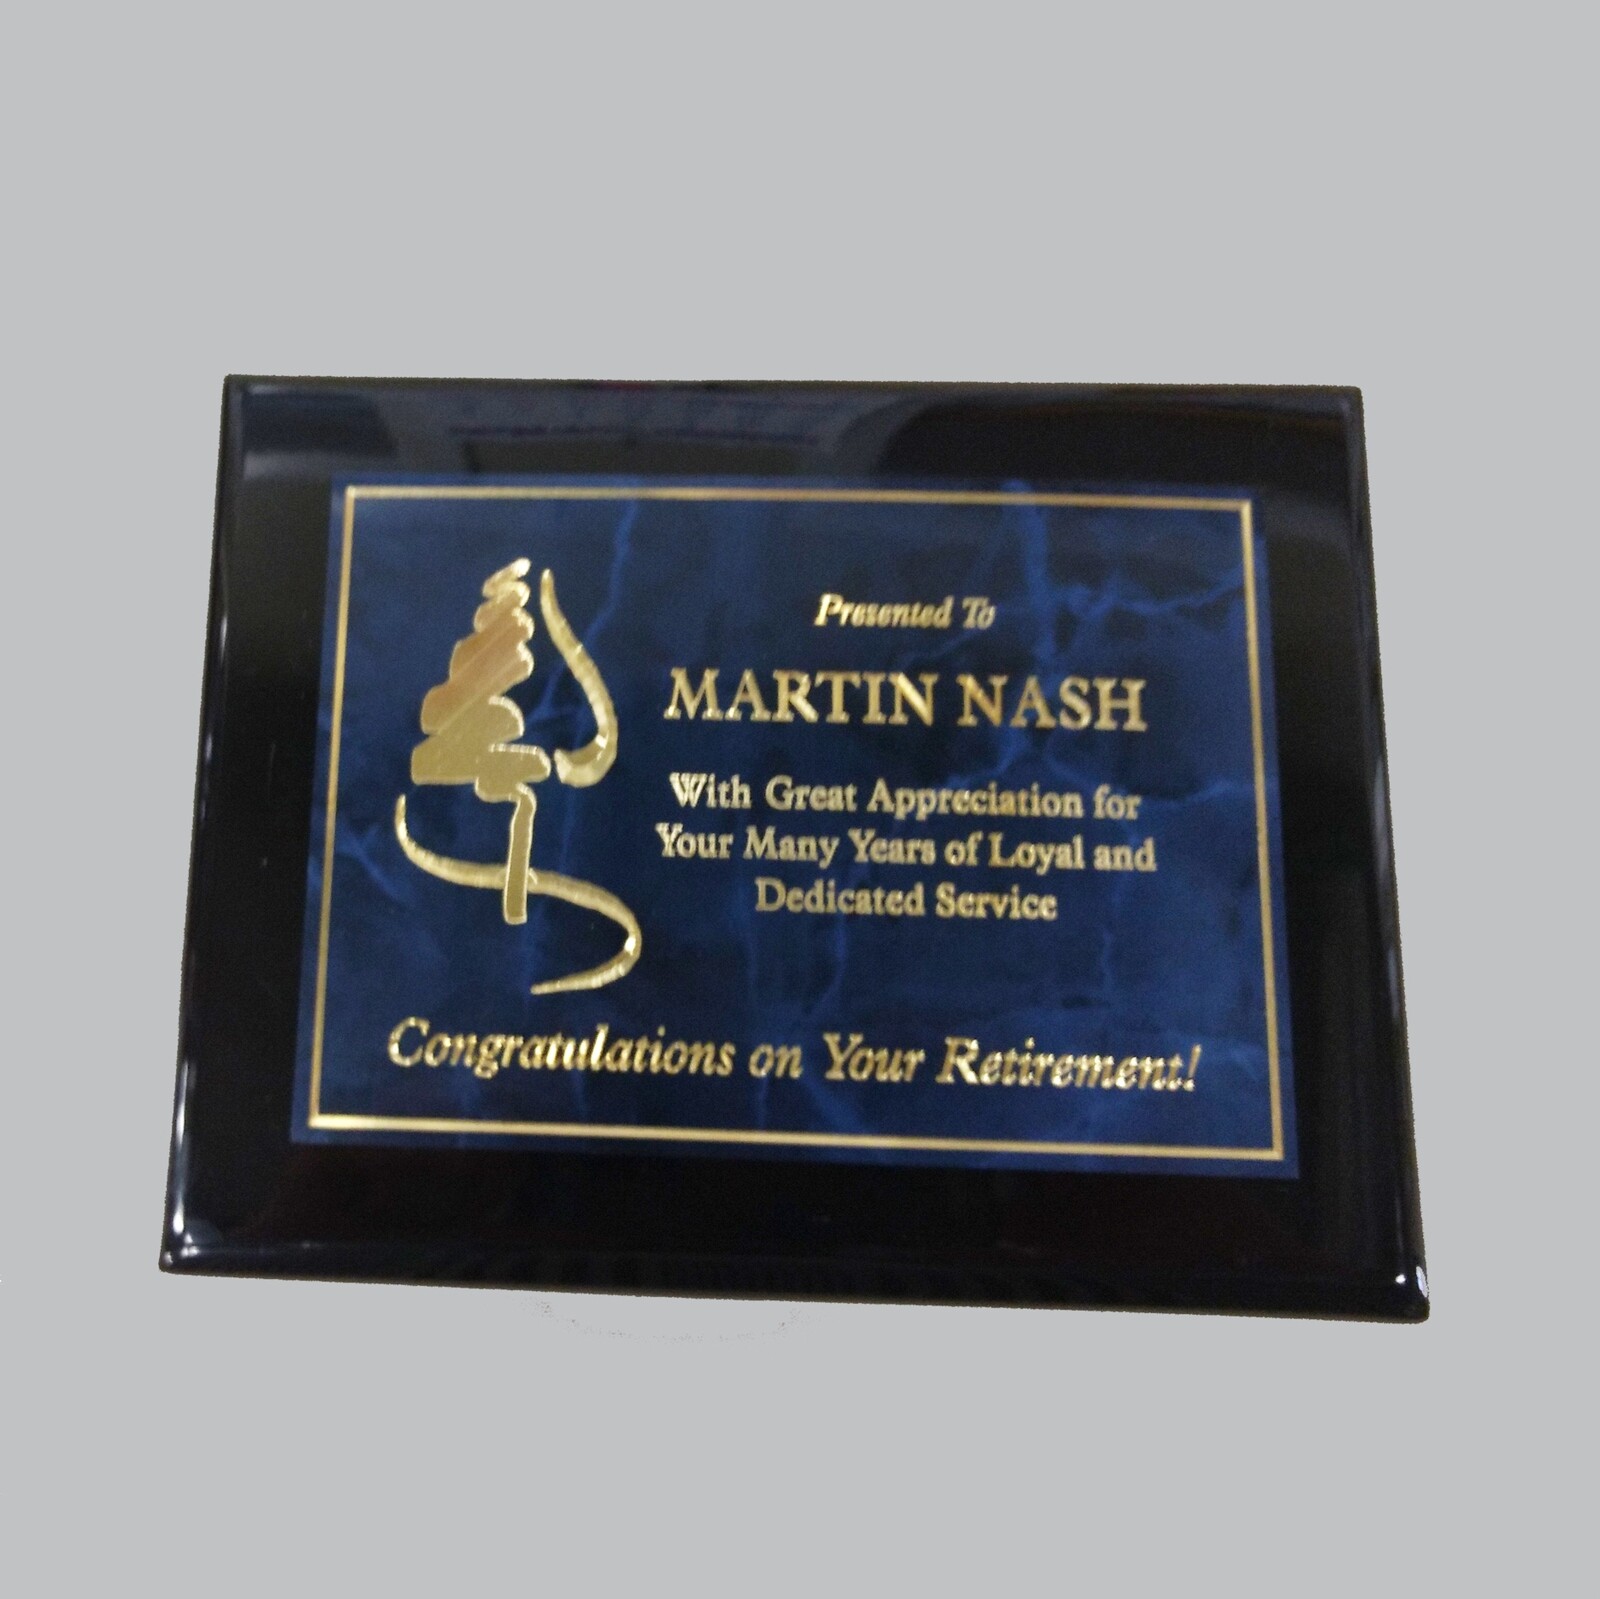 Black Piano Finish Plaque With Blue Marbled Plate In 5 Sizes